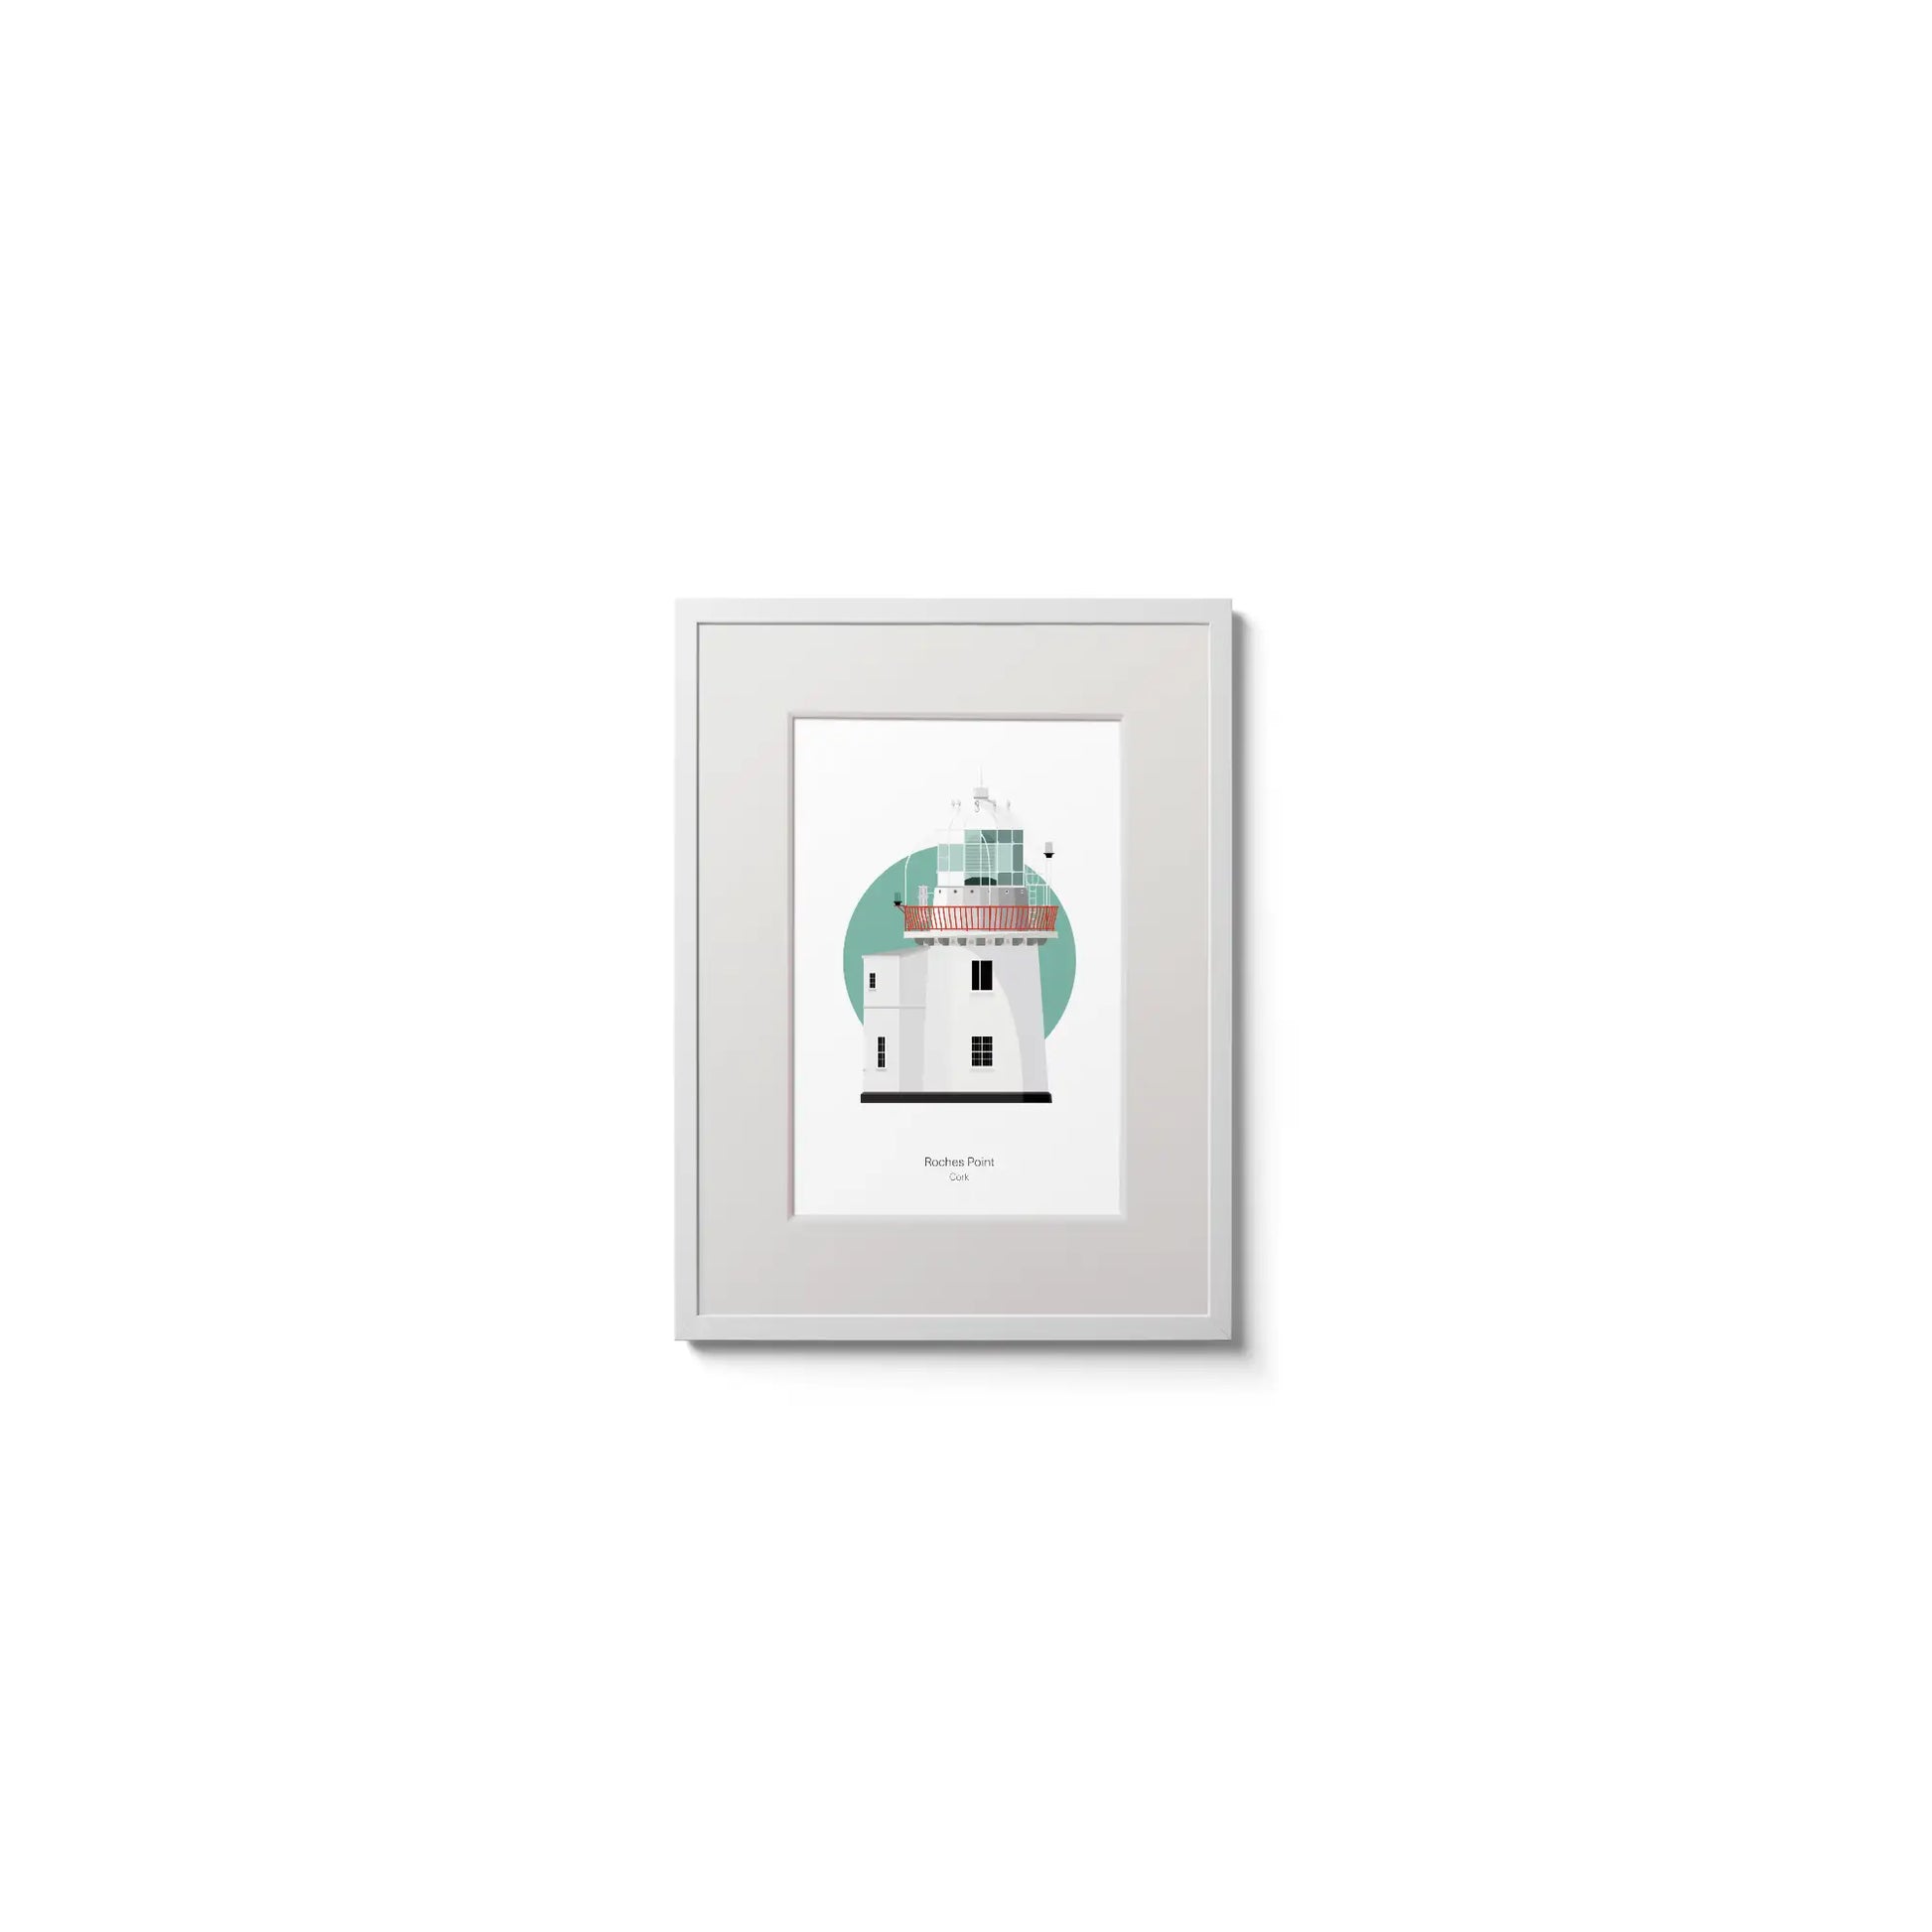 Illustration of Roches Point lighthouse on a white background inside light blue square,  in a white frame measuring 15x20cm.